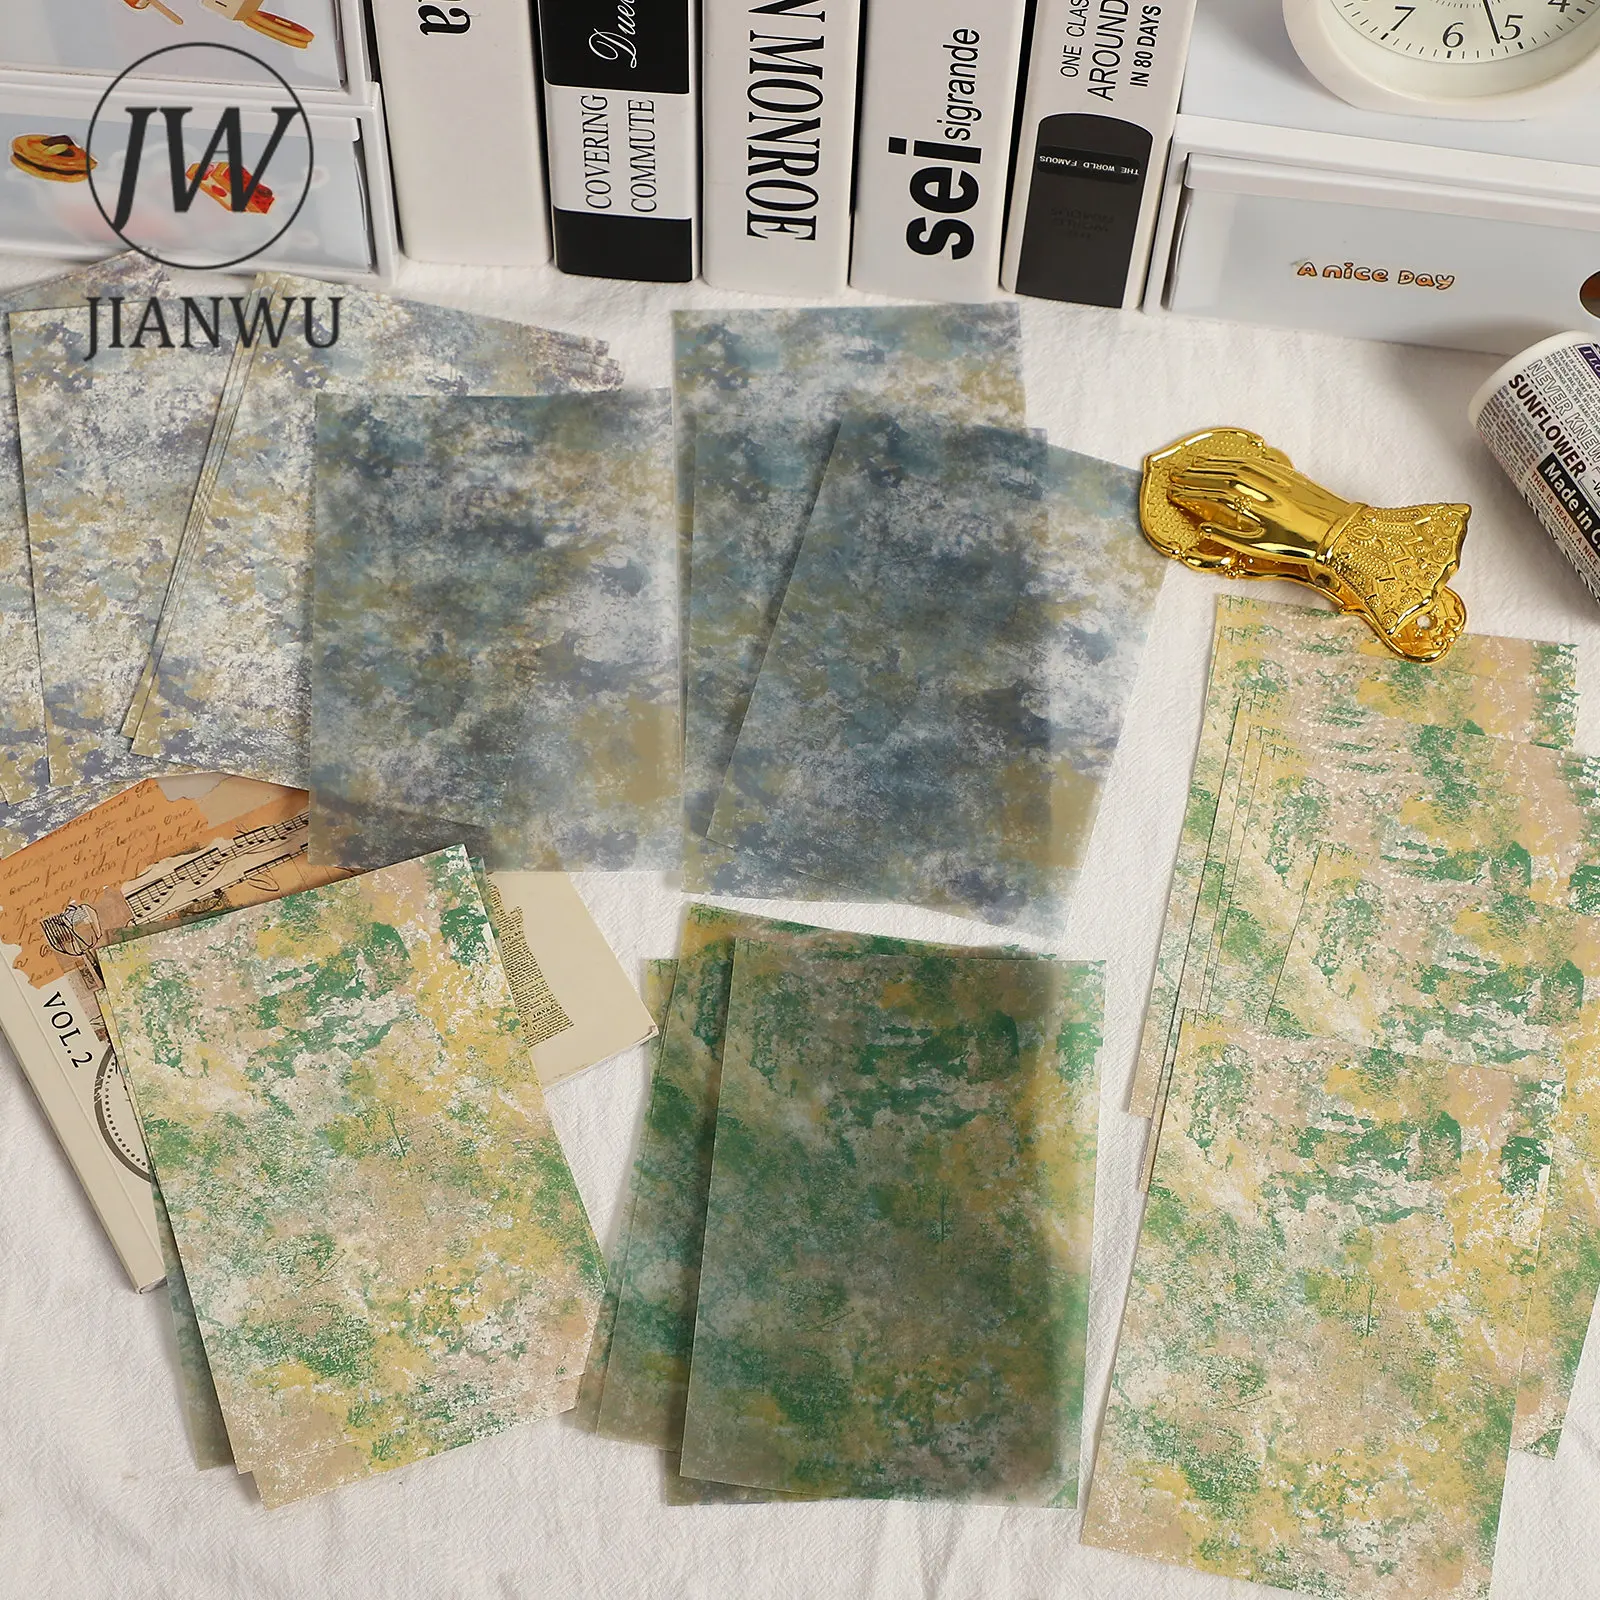 JIANWU 30 Sheets Blank Diary Series Vintage Border Decor Material Paper  Creative DIY Junk Journal Scrapbook Collage Stationery - AliExpress